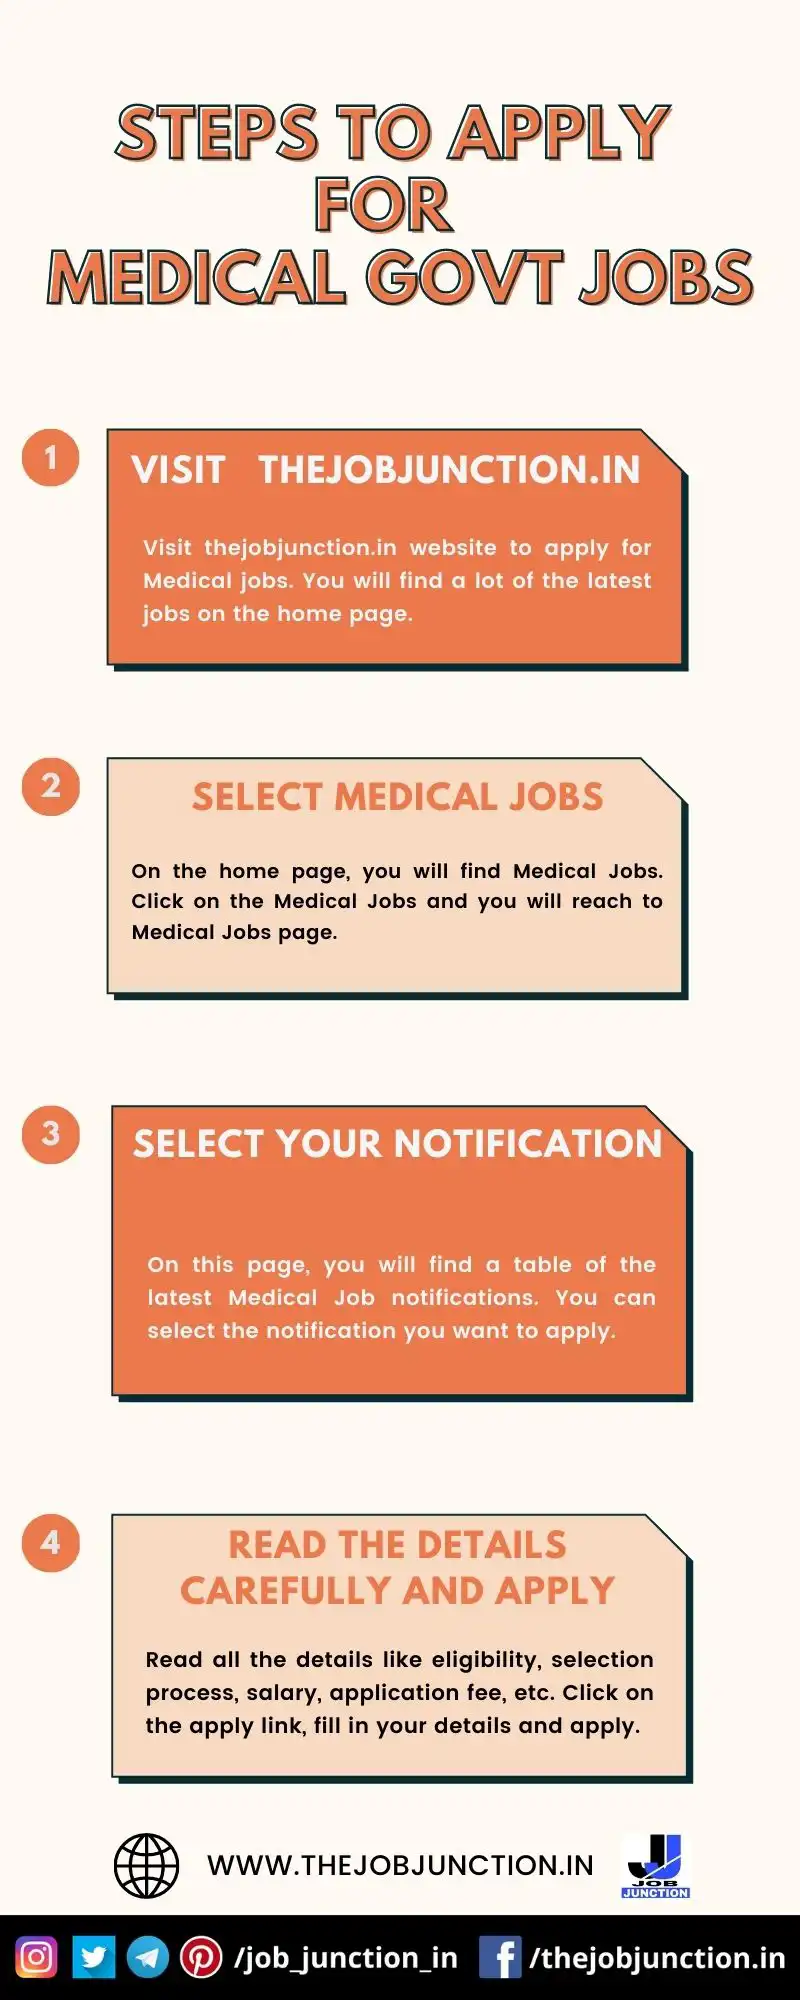 STEPS TO APPLY FOR MEDICAL JOBS